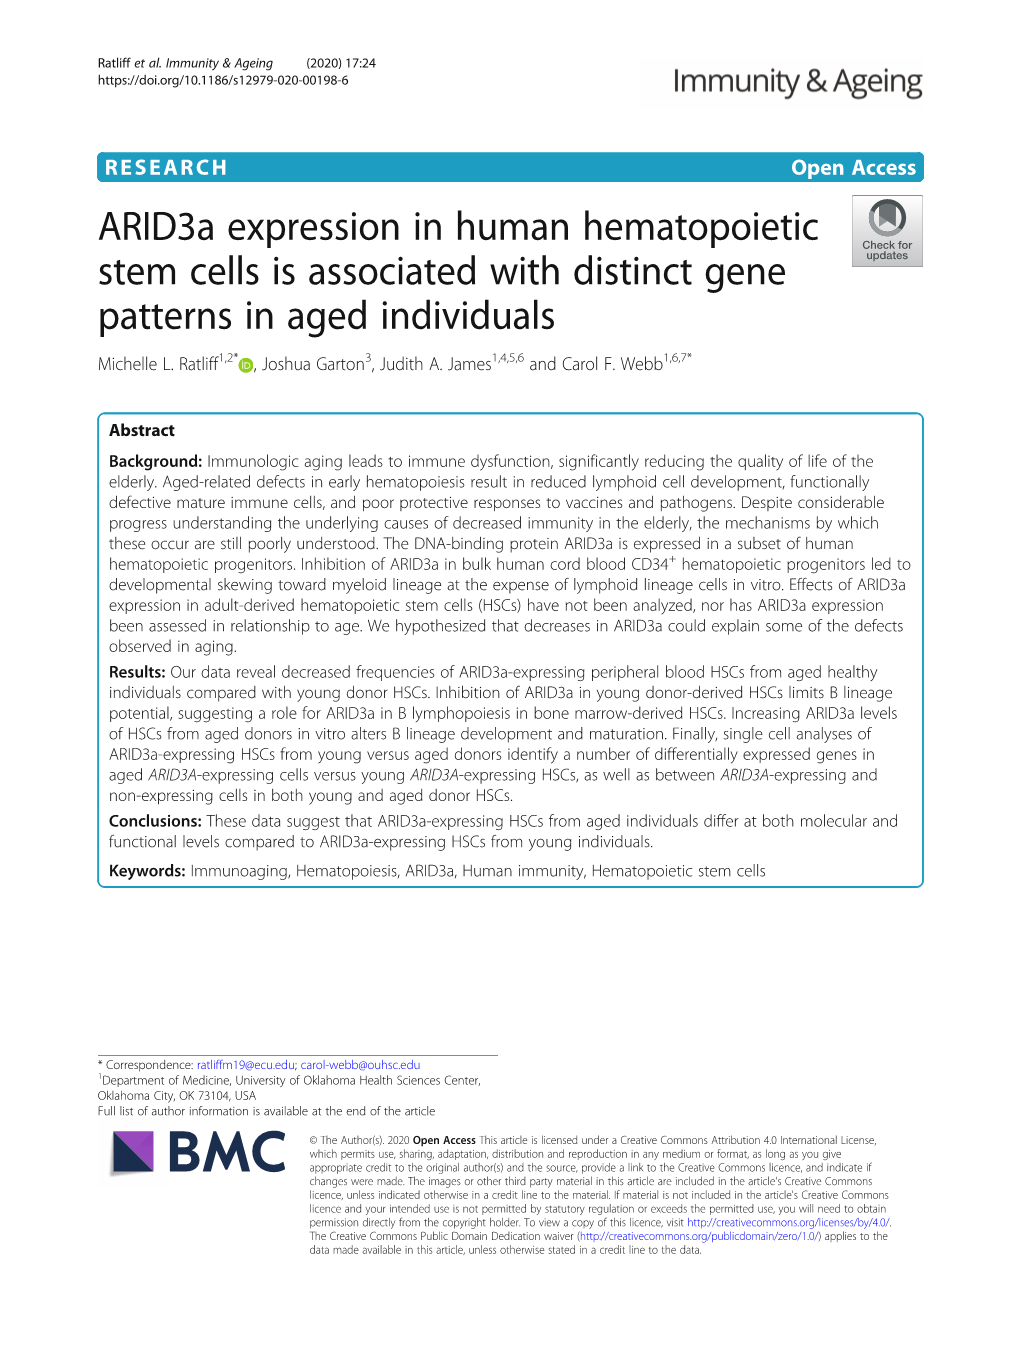 Arid3a Expression in Human Hematopoietic Stem Cells Is Associated with Distinct Gene Patterns in Aged Individuals Michelle L